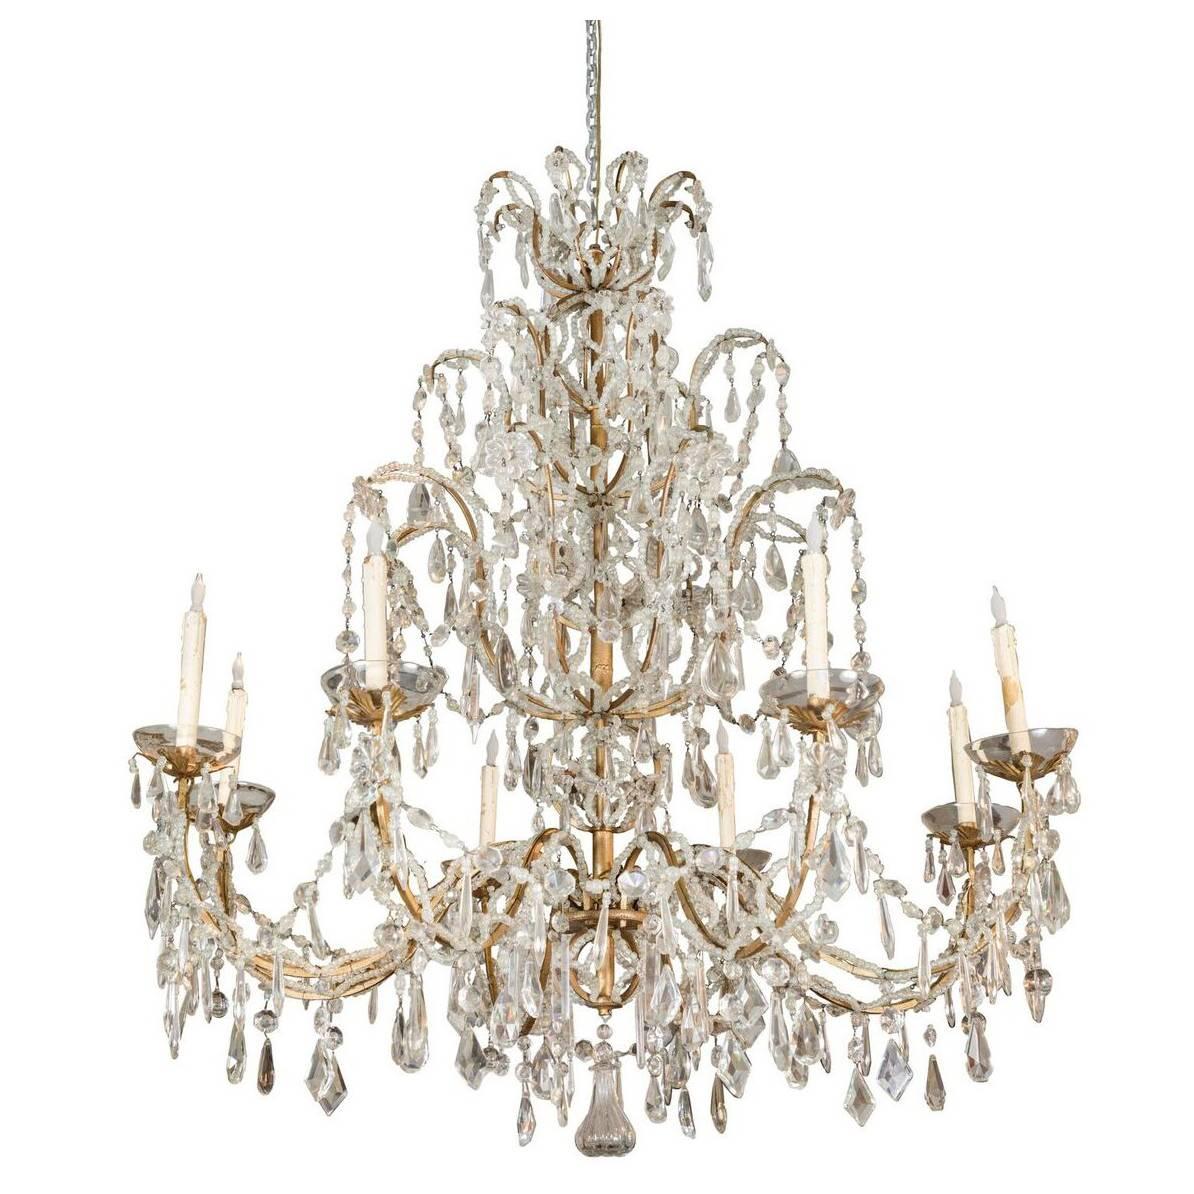 Very Large 19th Century Crystal Chandelier